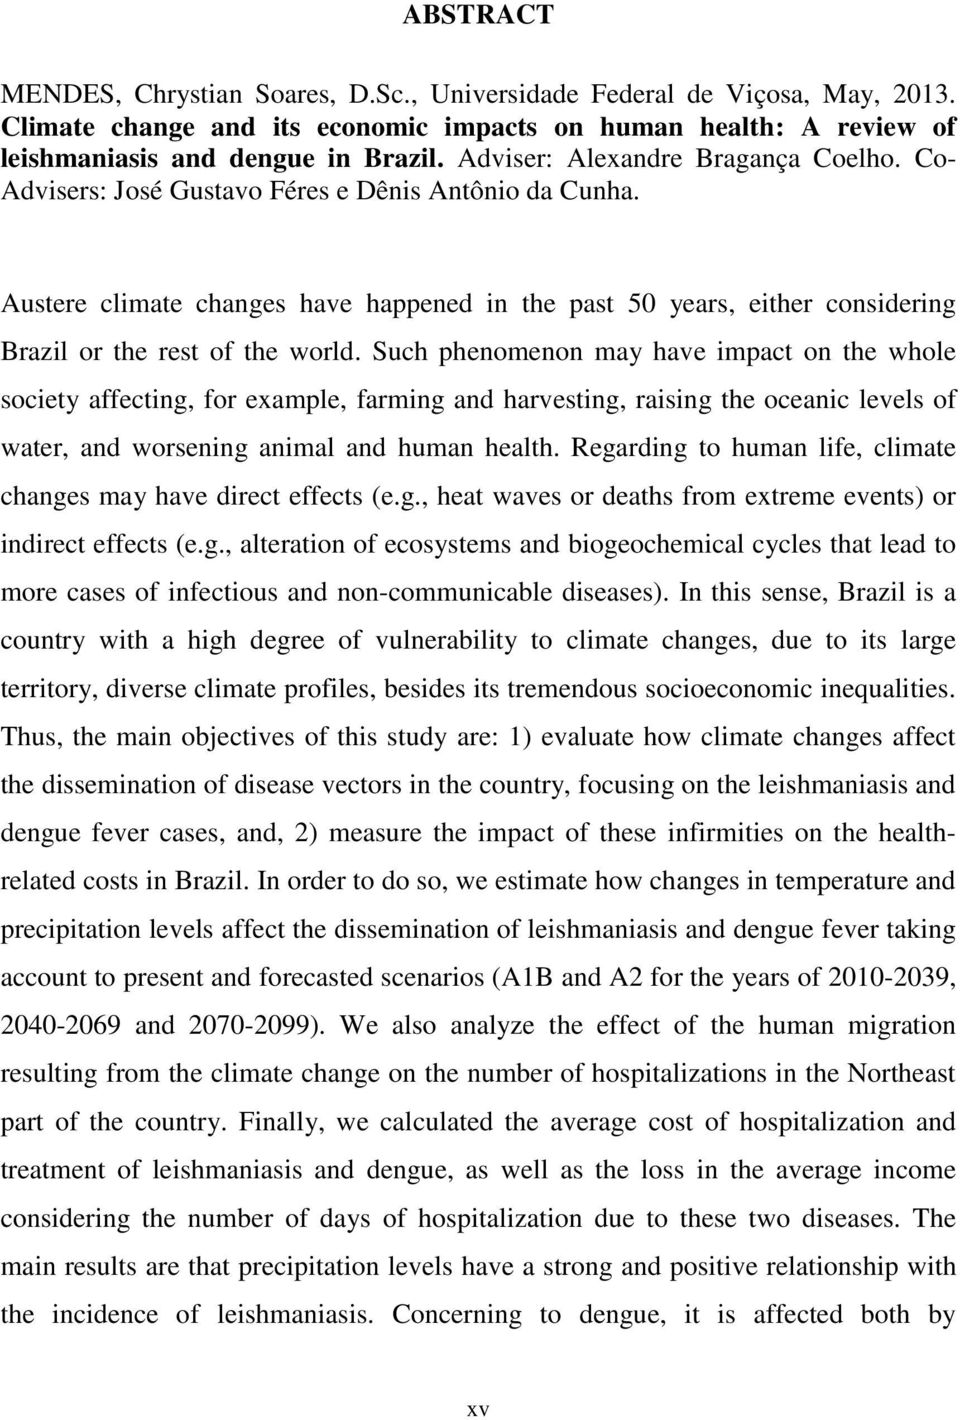 Austere climate changes have happened in the past 50 years, either considering Brazil or the rest of the world.